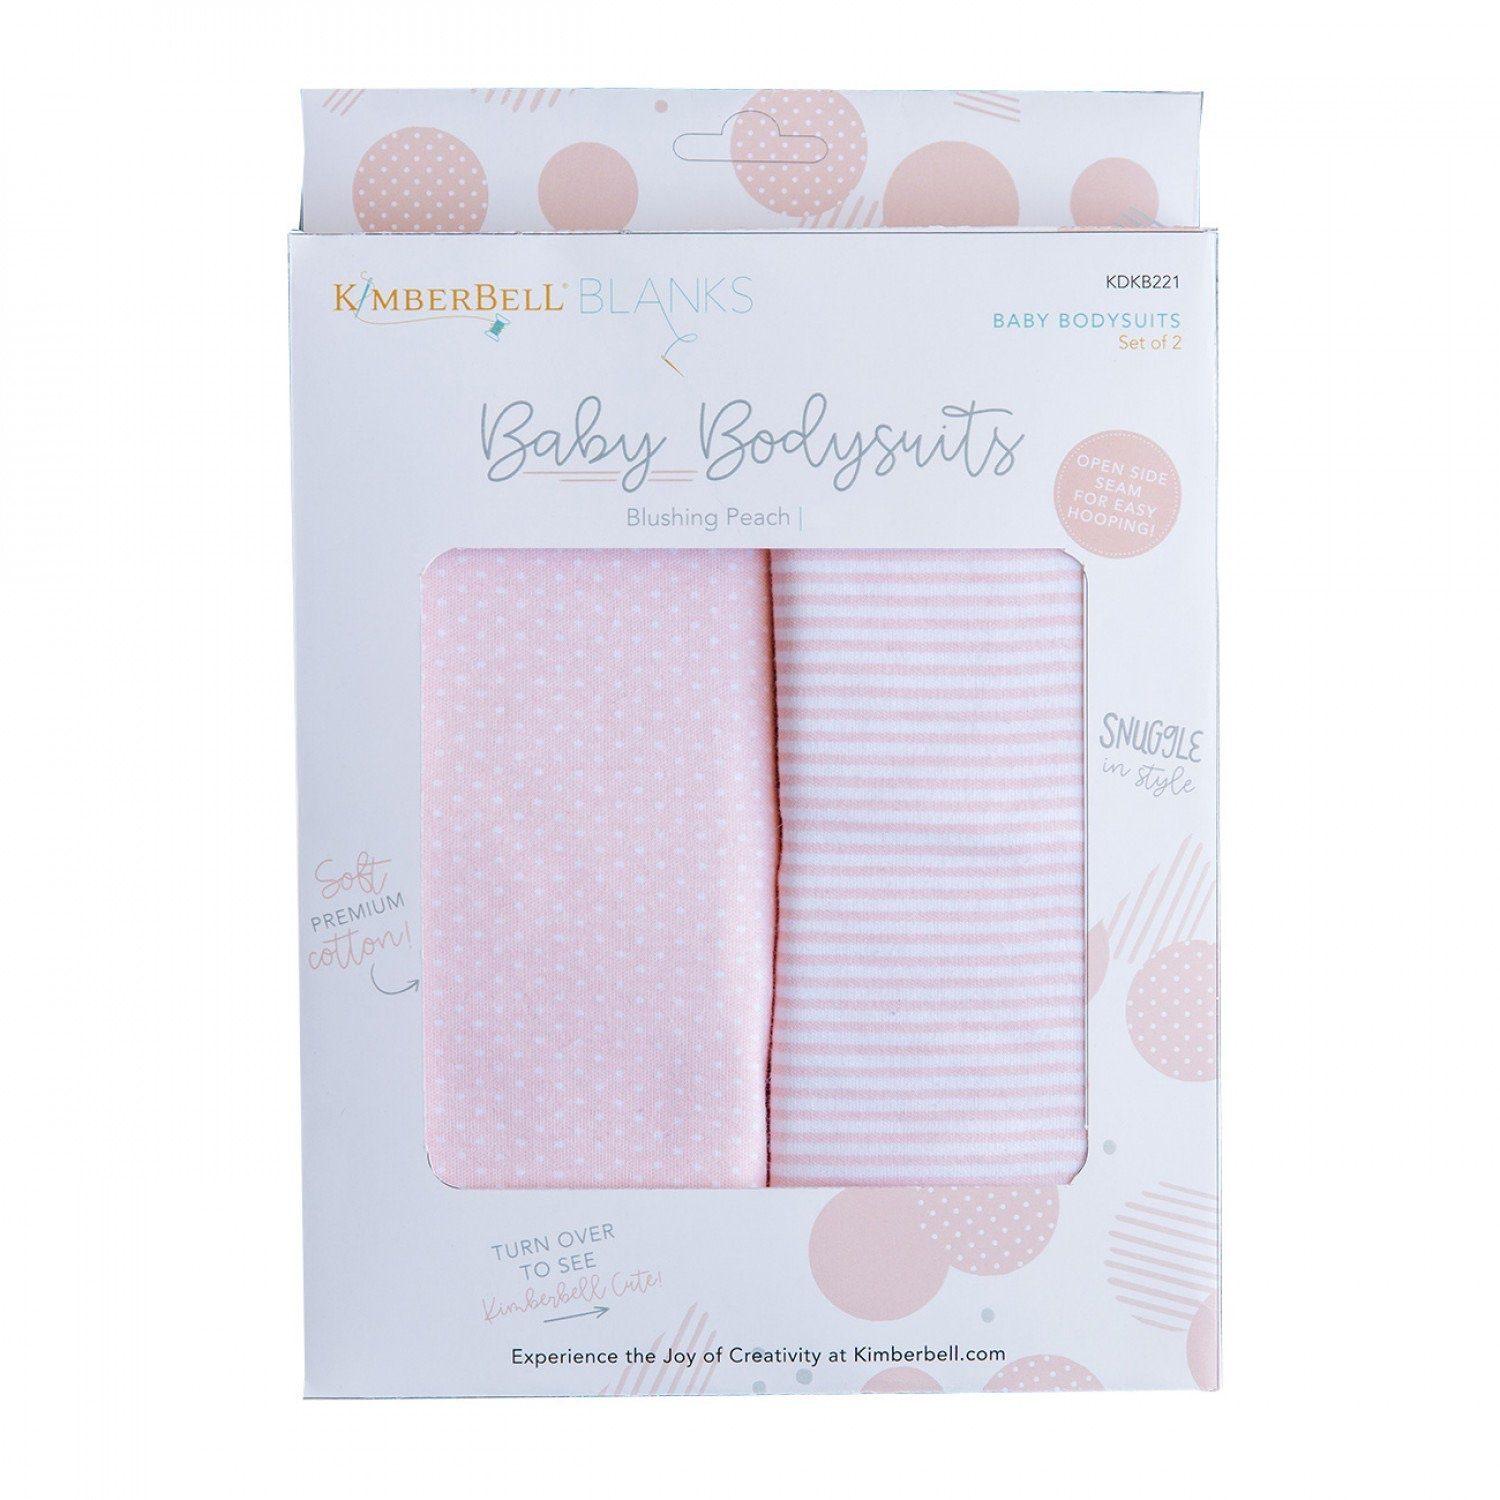 Baby Bodysuits - Blushing Peach -  (3-6 Months) - Pack of 2 - Kimberbell - Kawartha Quilting and Sewing LTD.